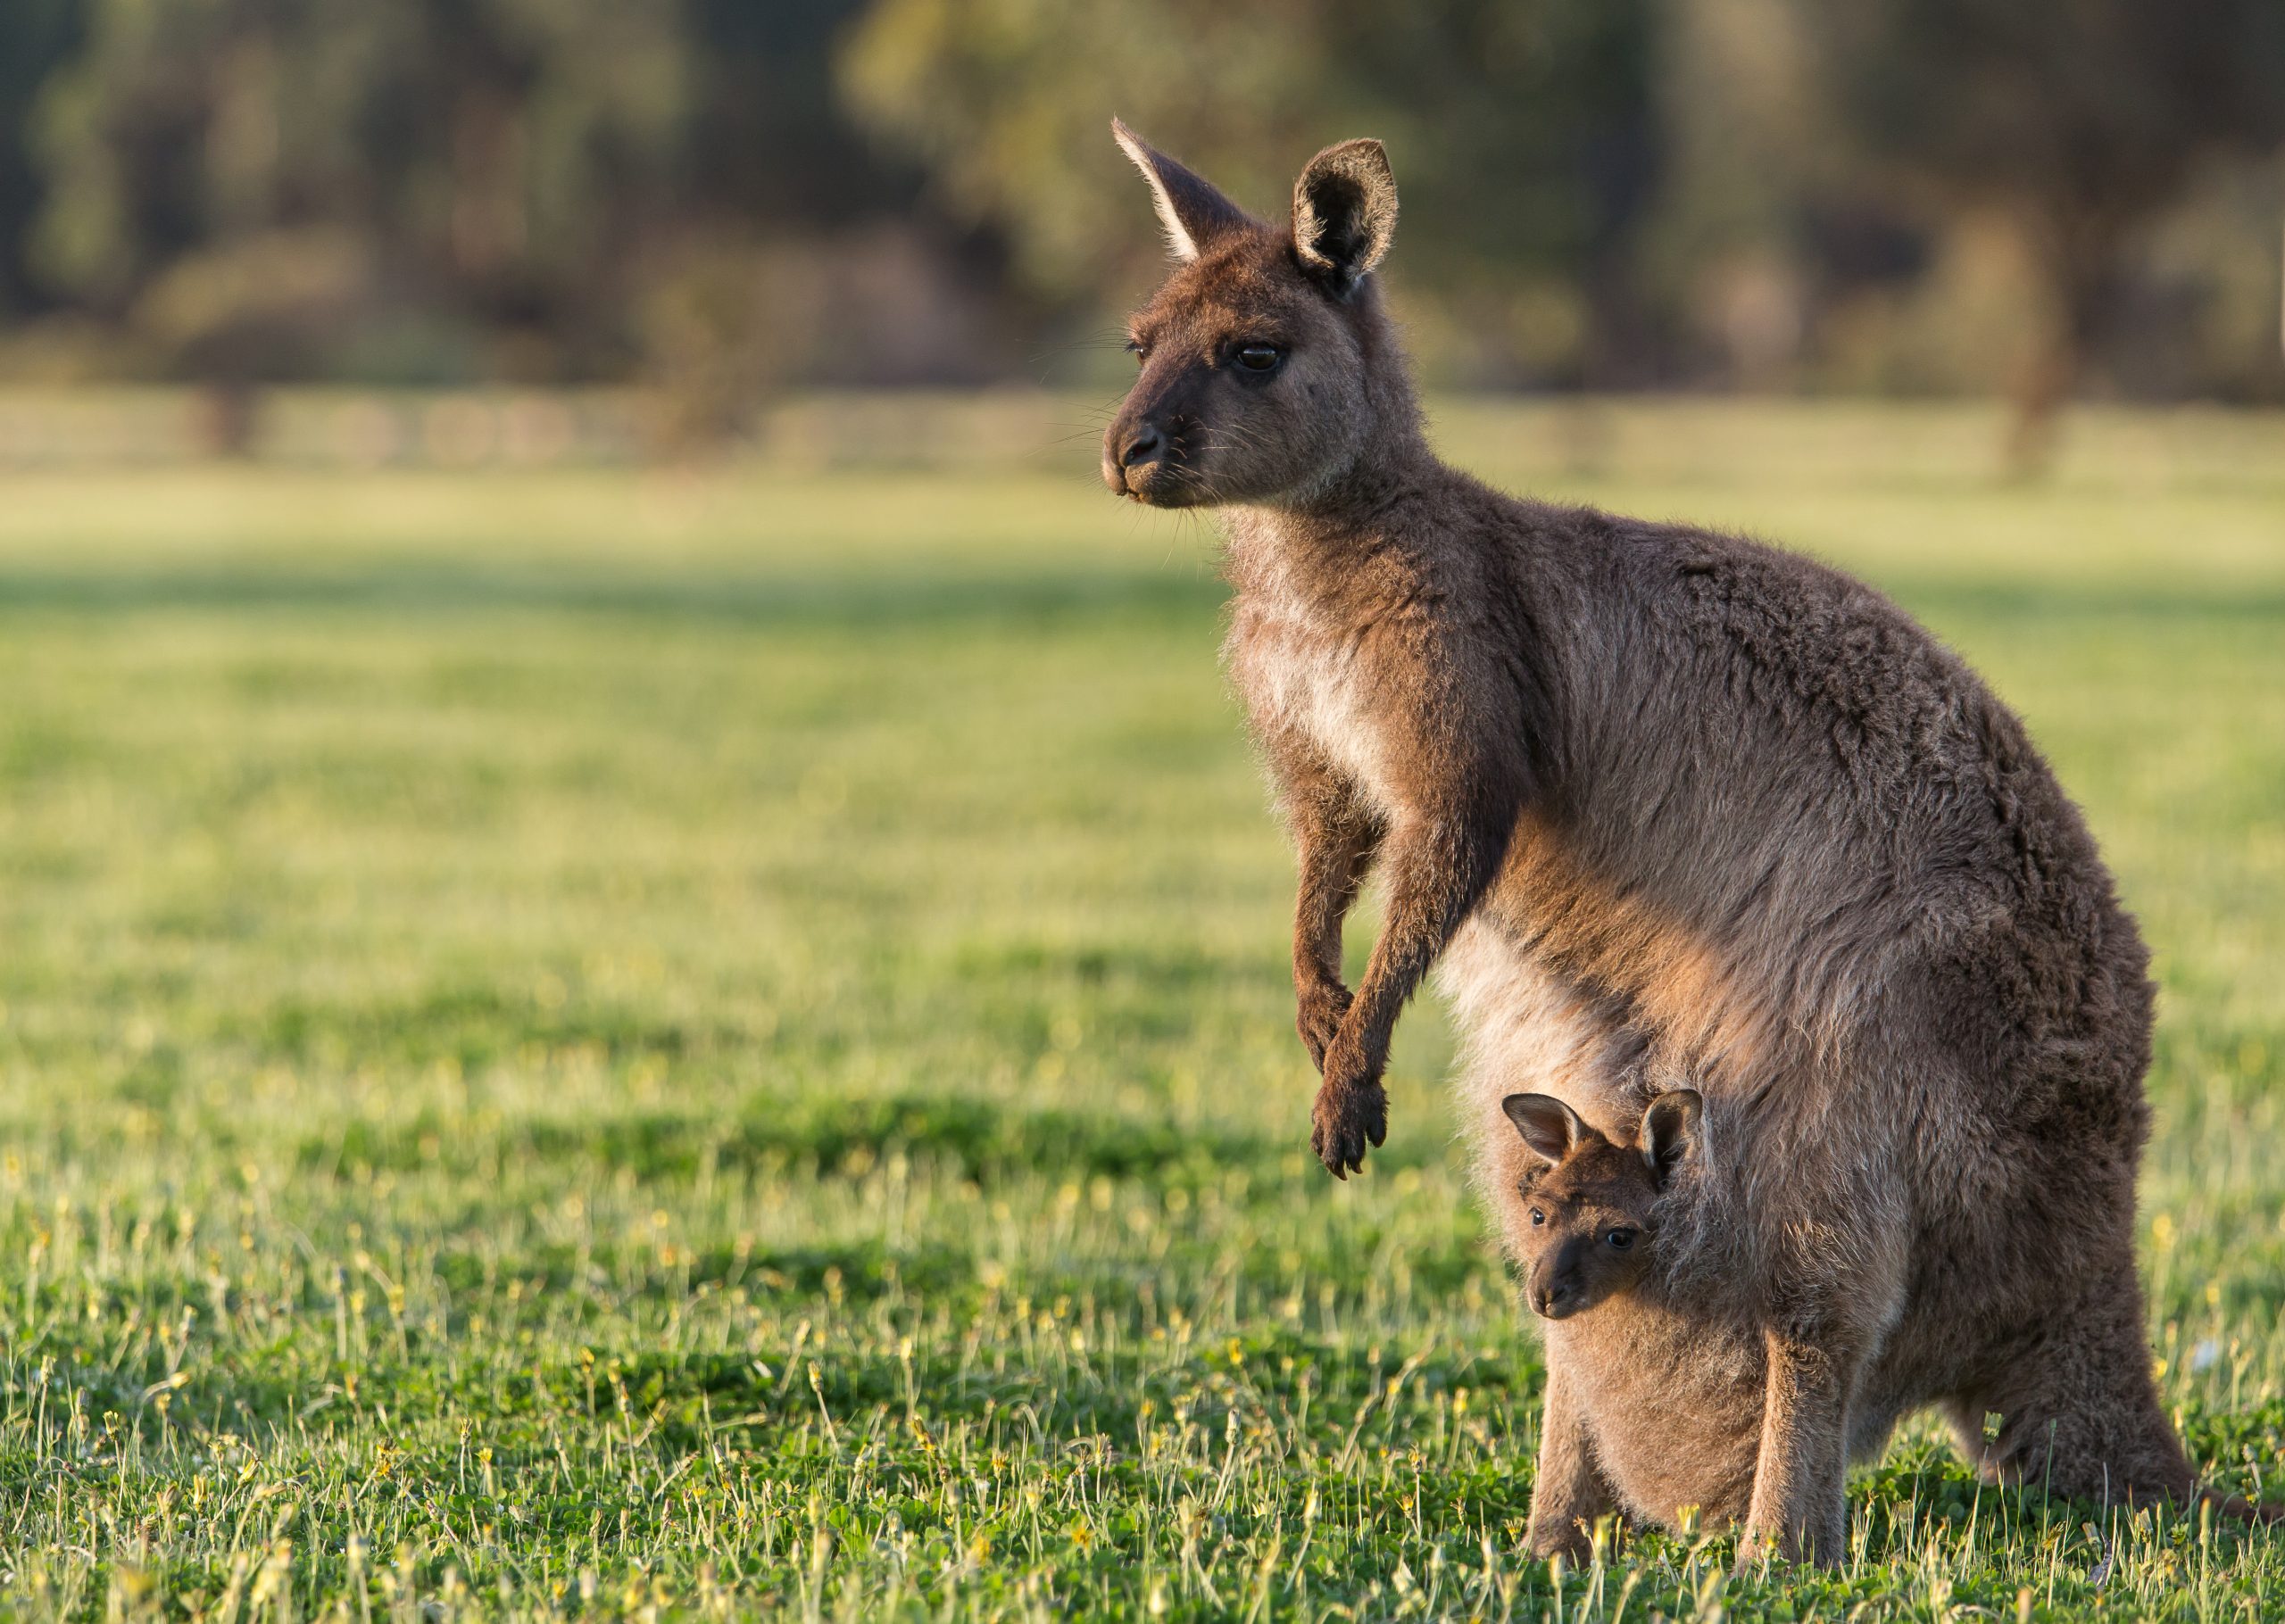 Kangaroo standing on grass field with child in pouch